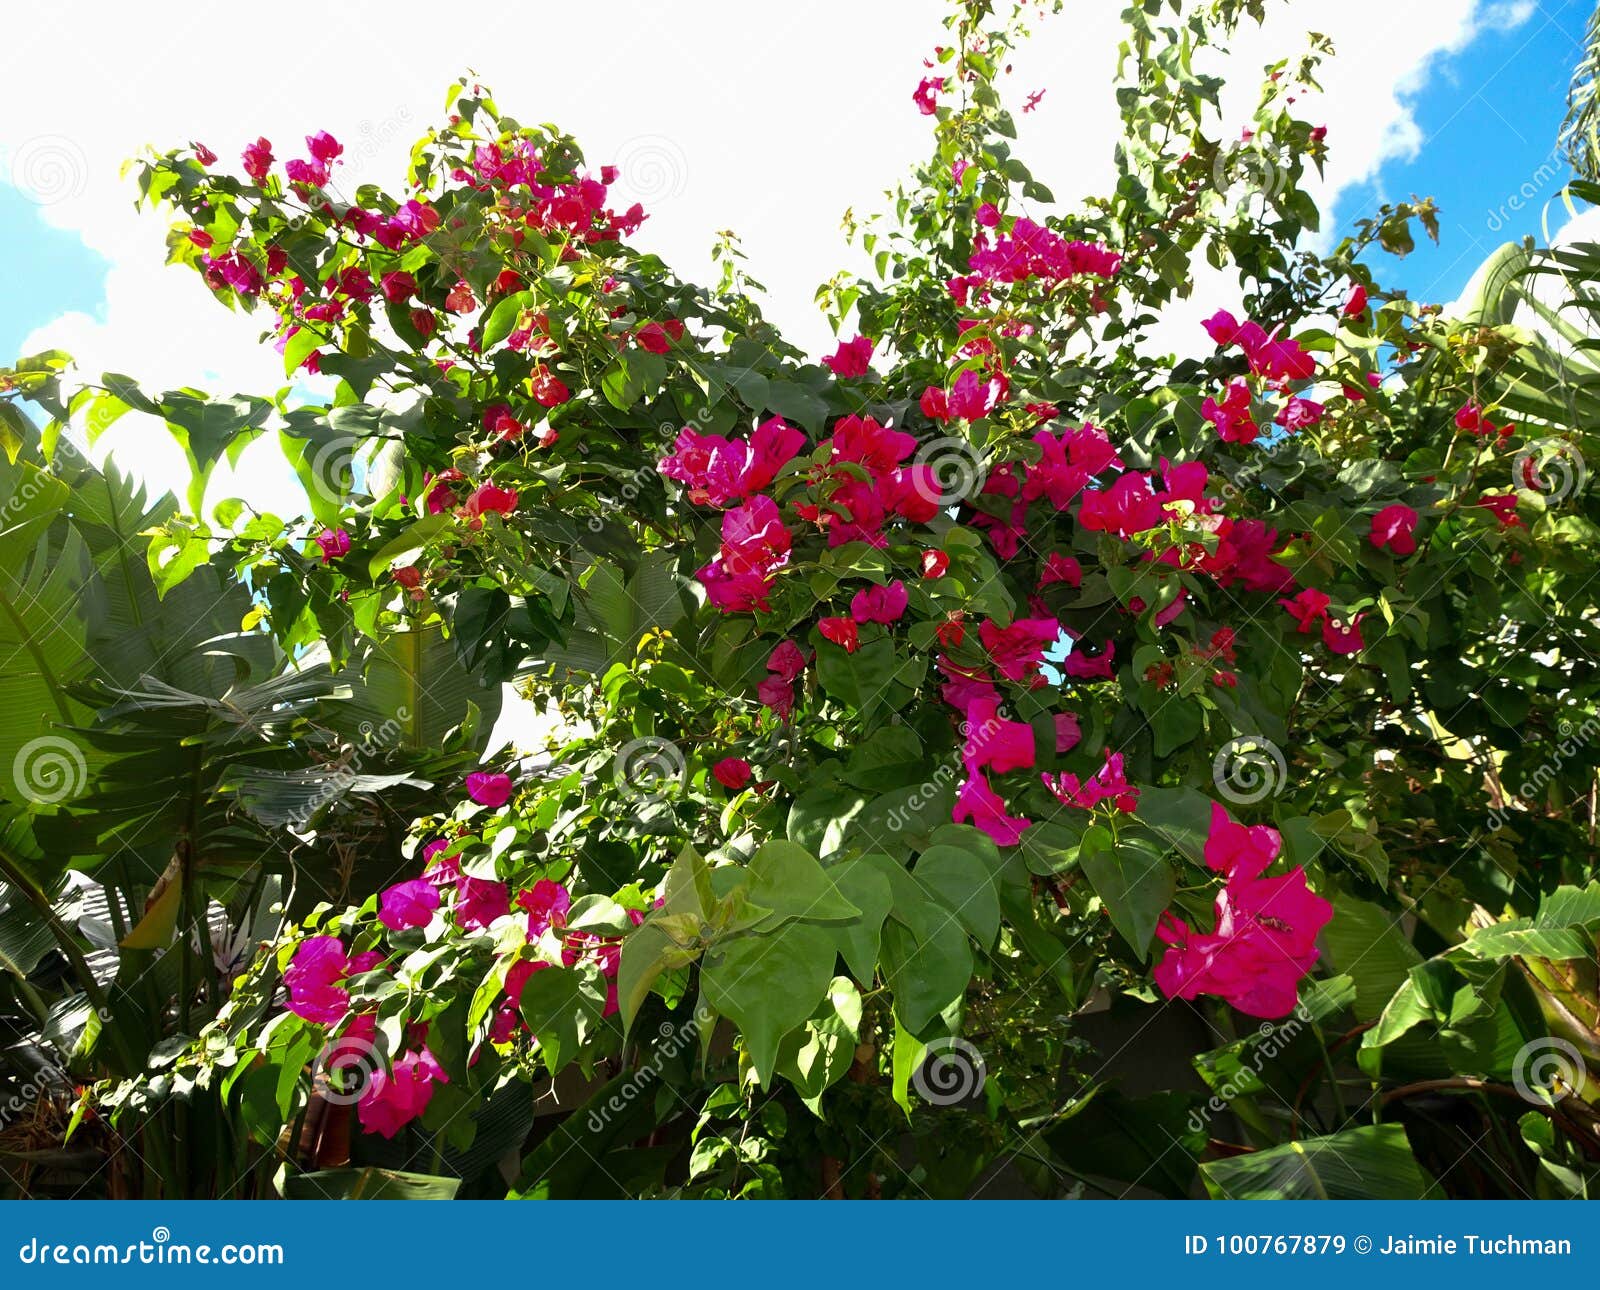 Pink Tropical Flowers On A Bush Against Blue Sky Stock Image Image Of Color Pink 100767879